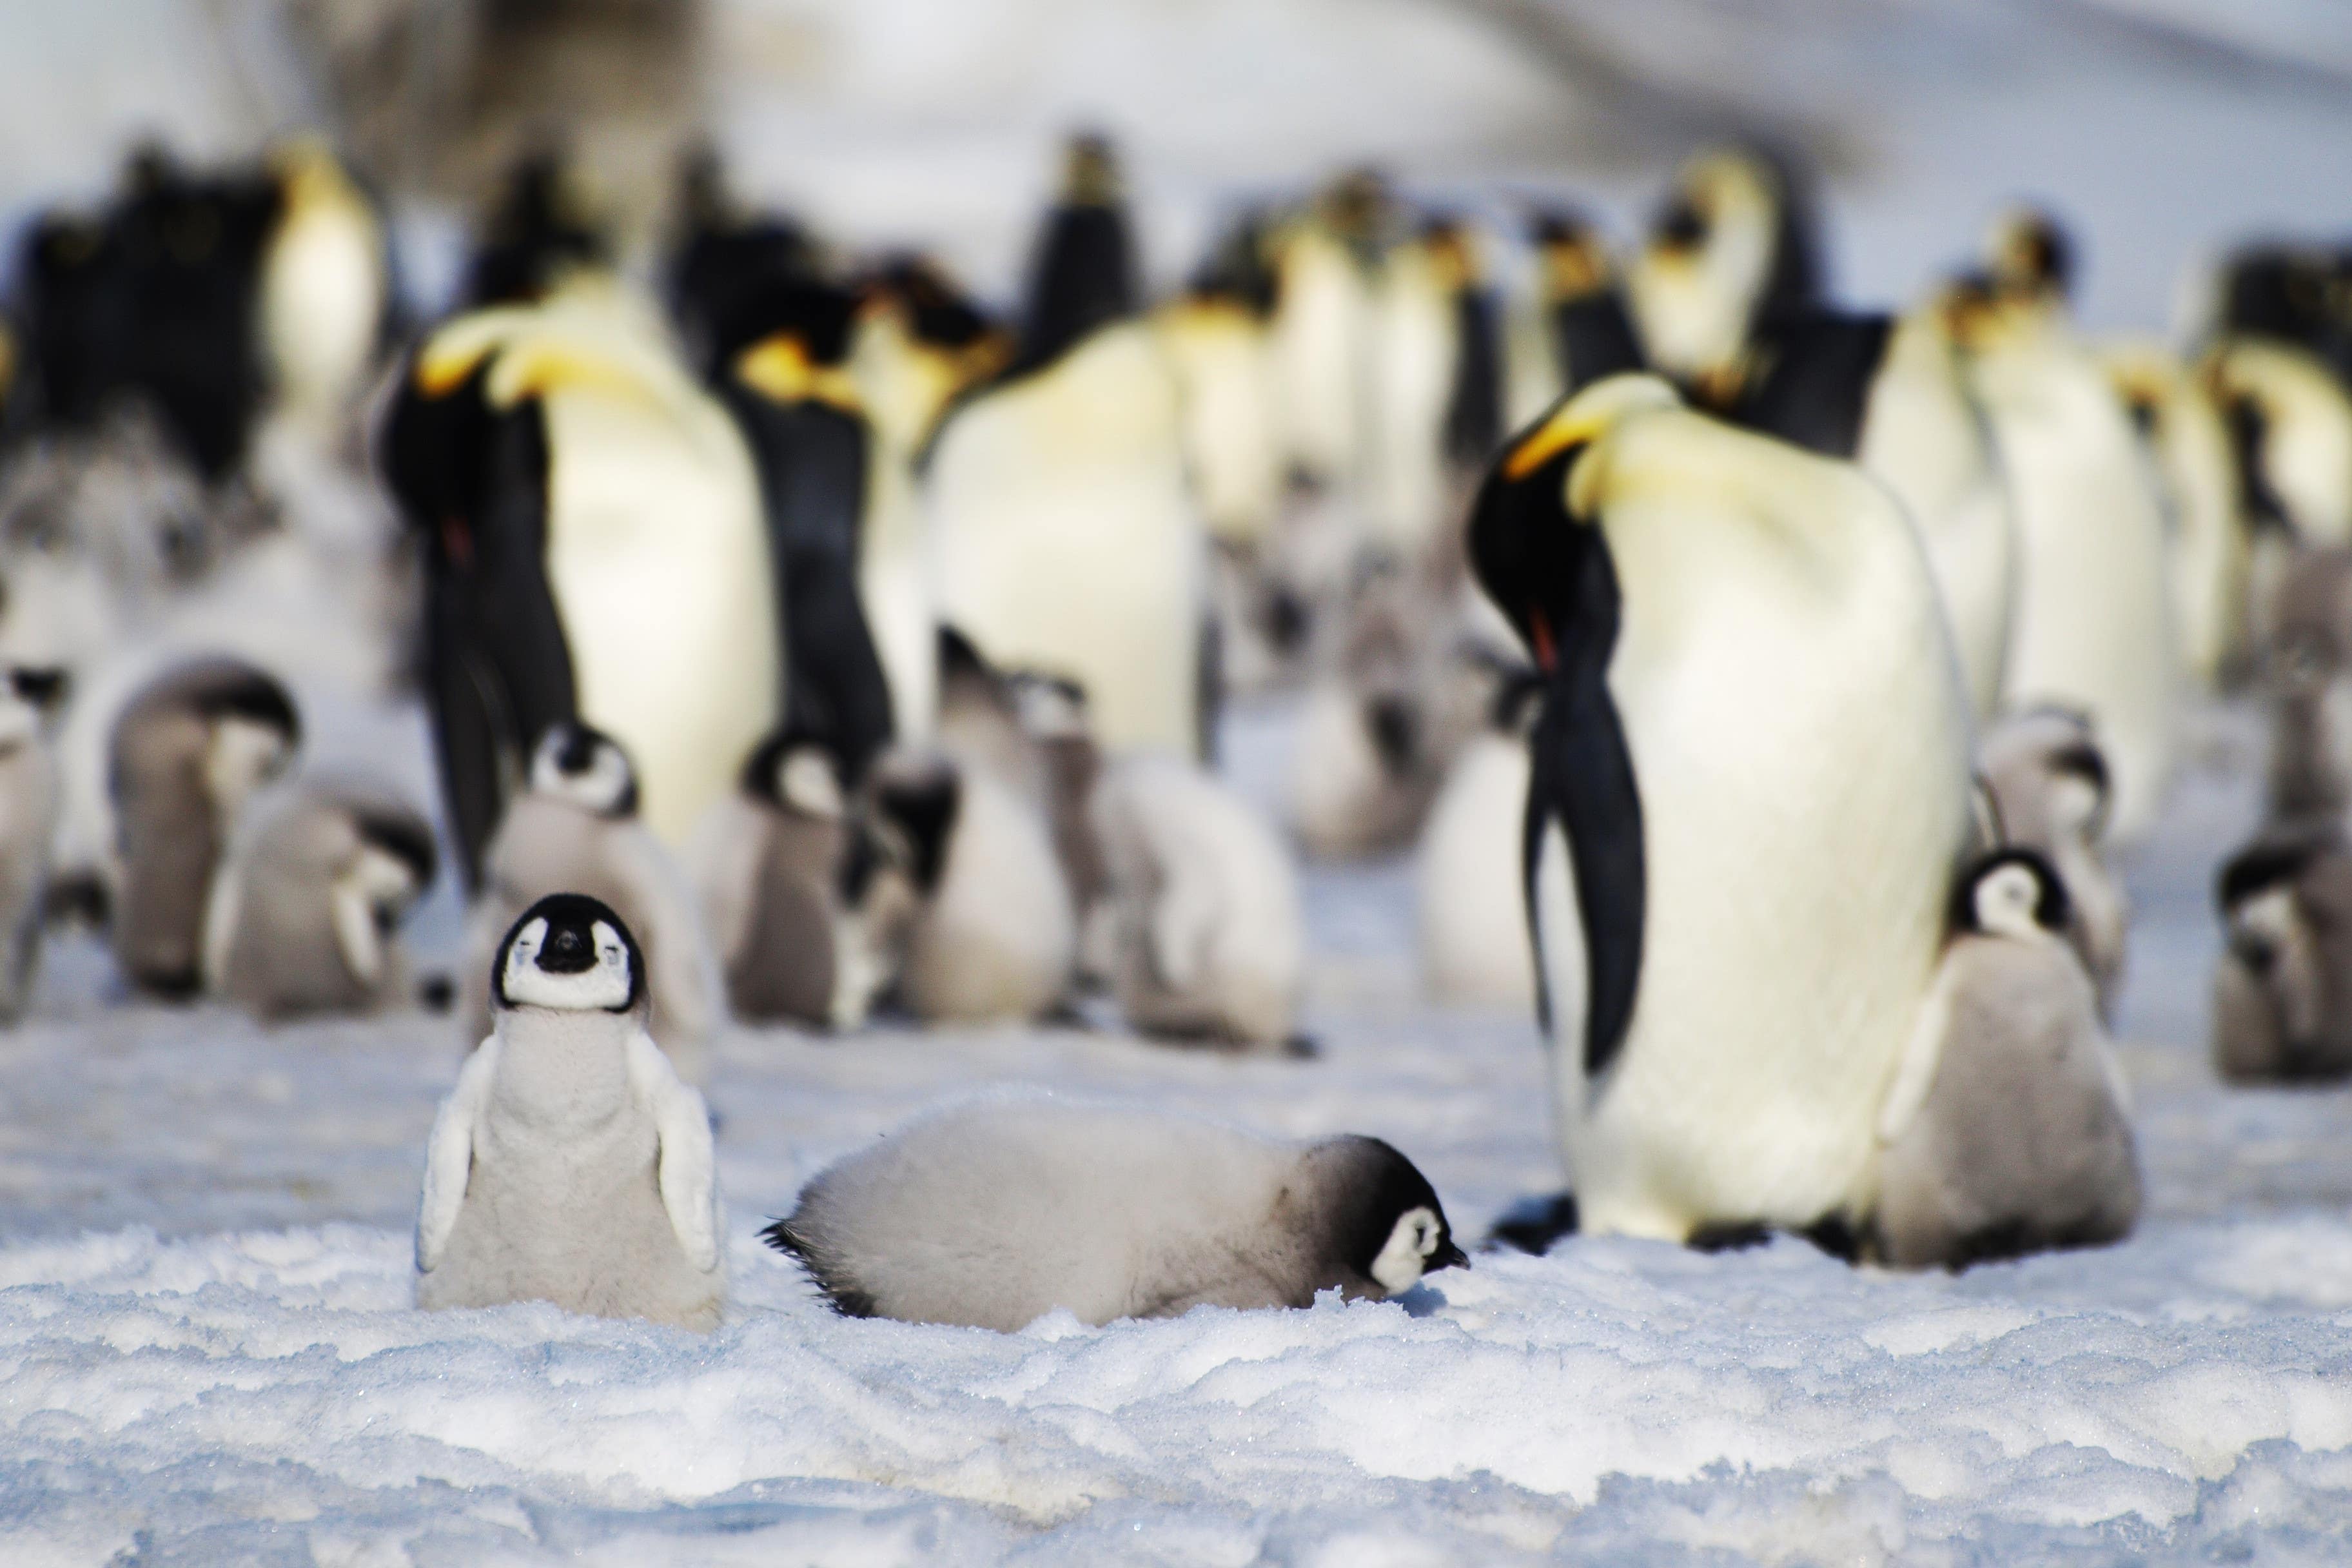 Emperor penguins need stable sea ice to breed (Peter Fretwell/British Antarctic Survey/PA)